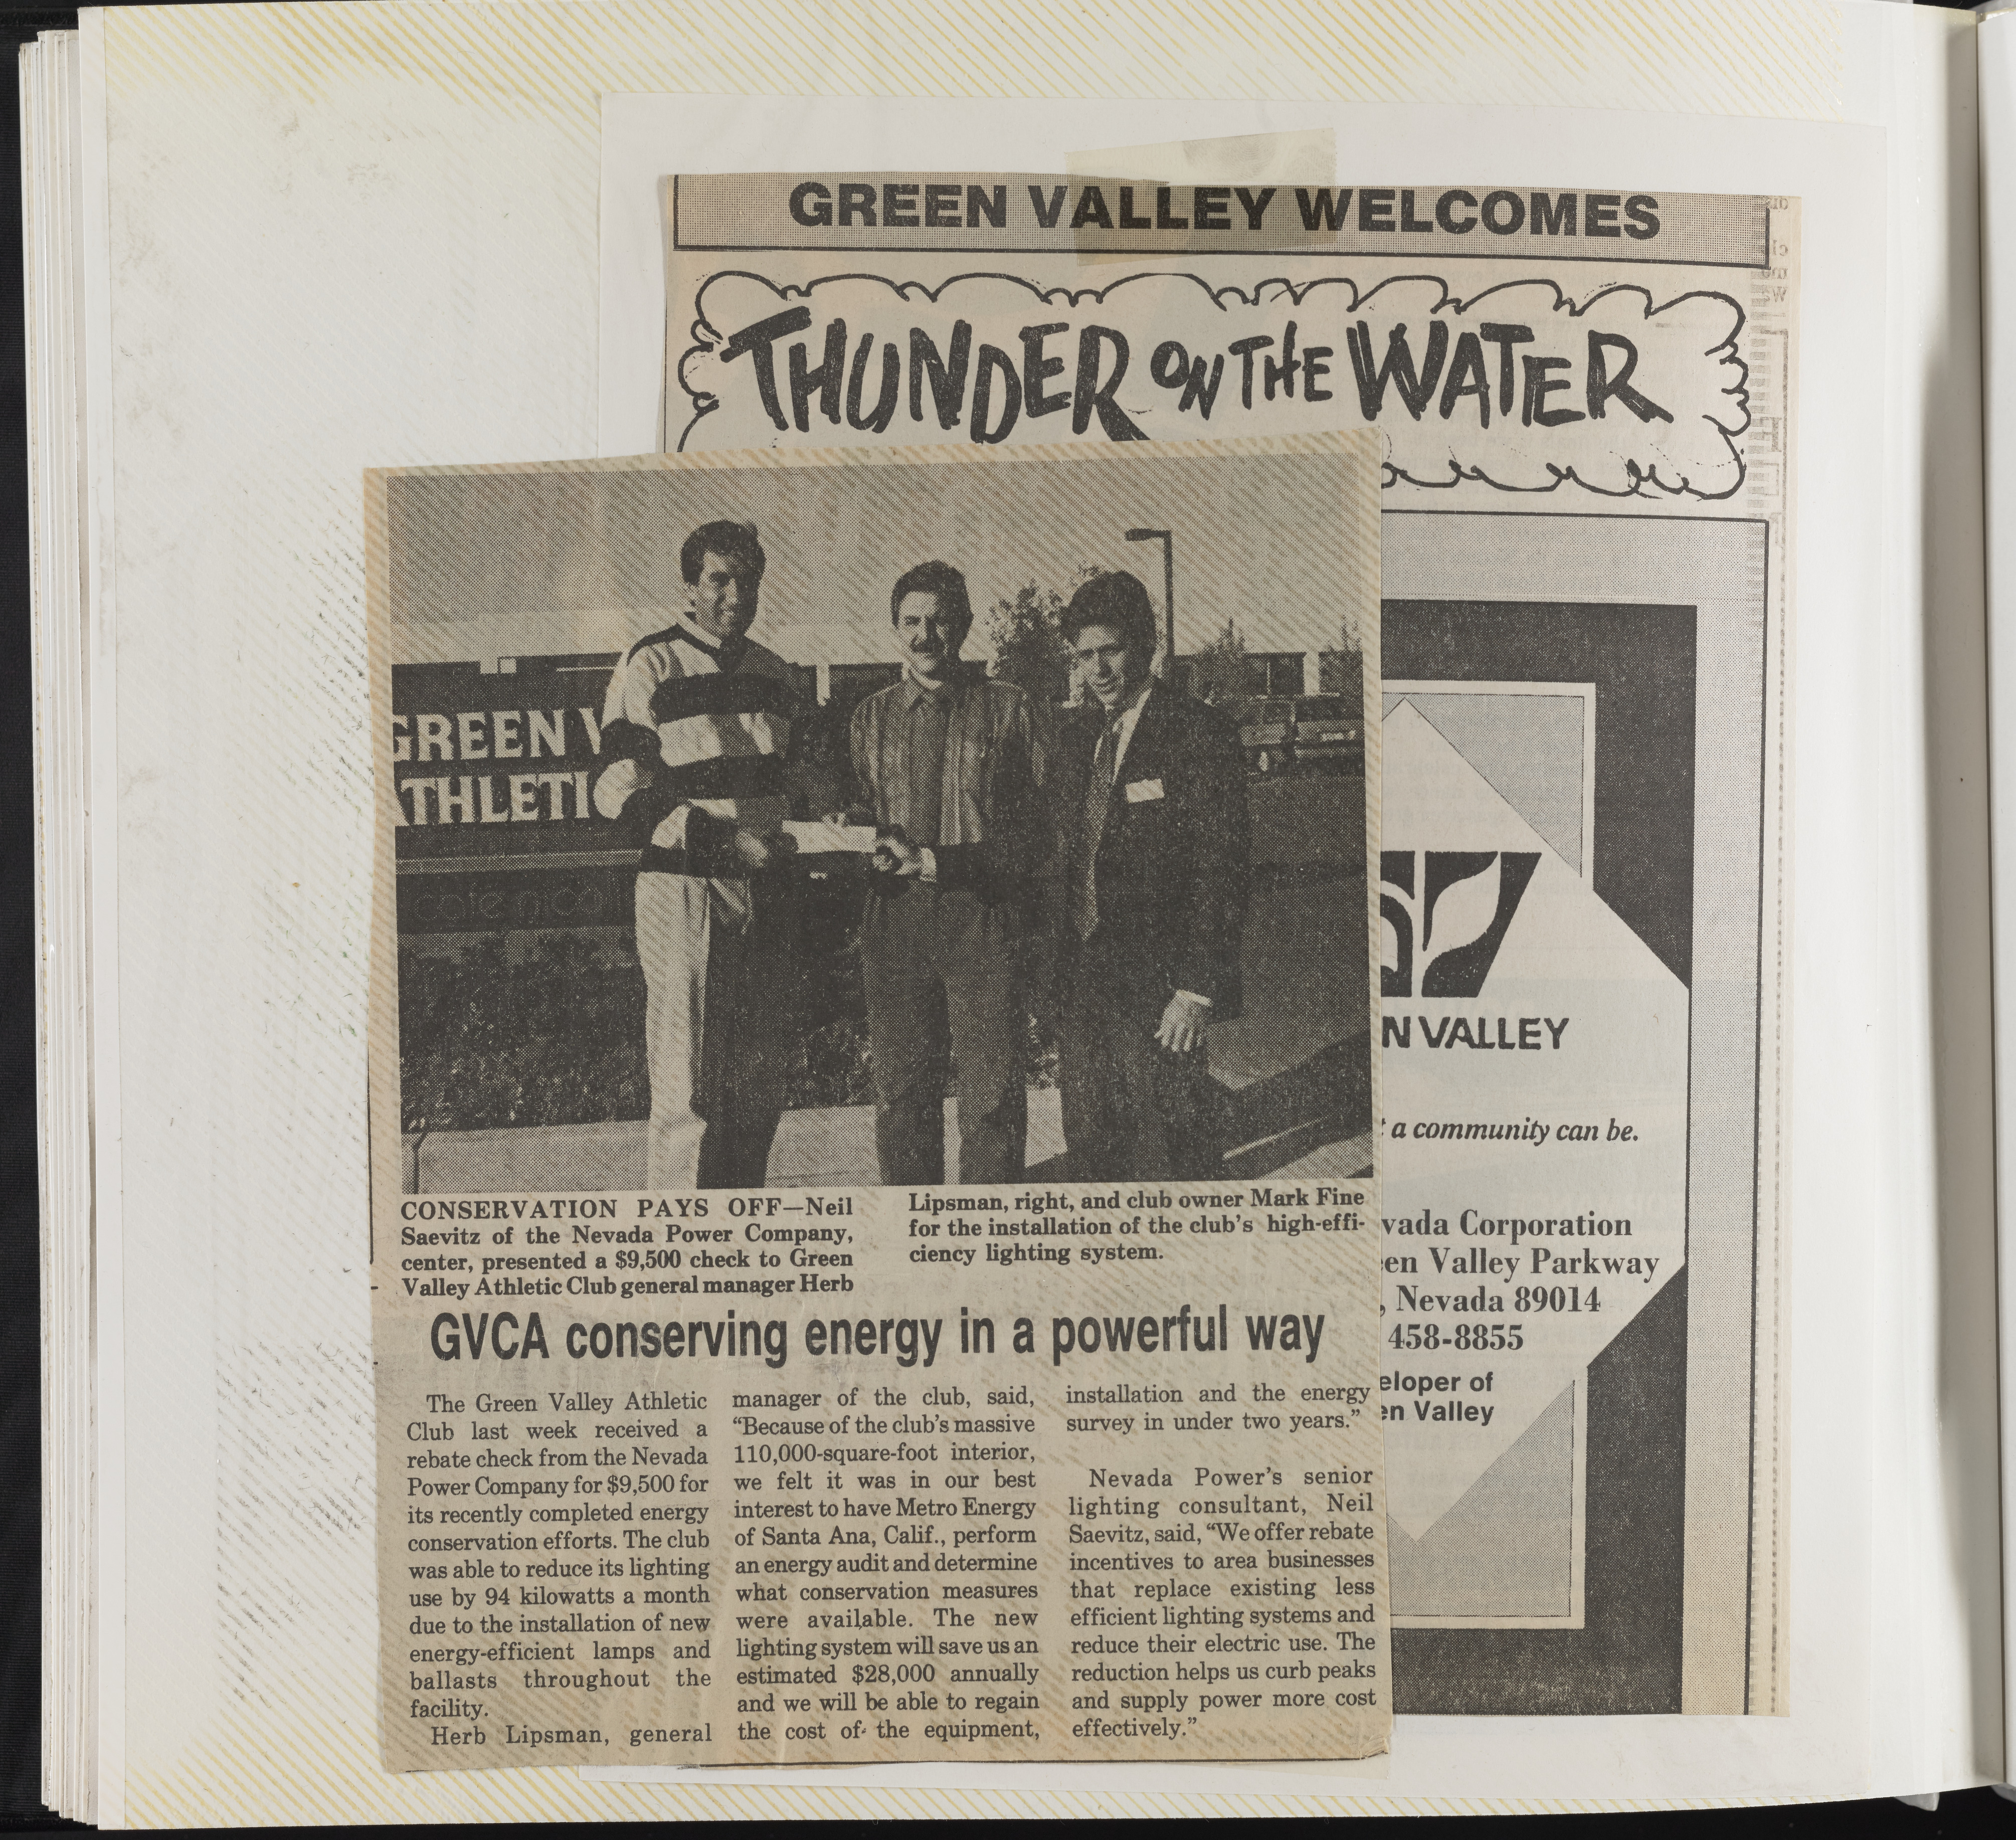 Newspaper clippings, GVCA conserving energy in a powerful way, publication and date unknown